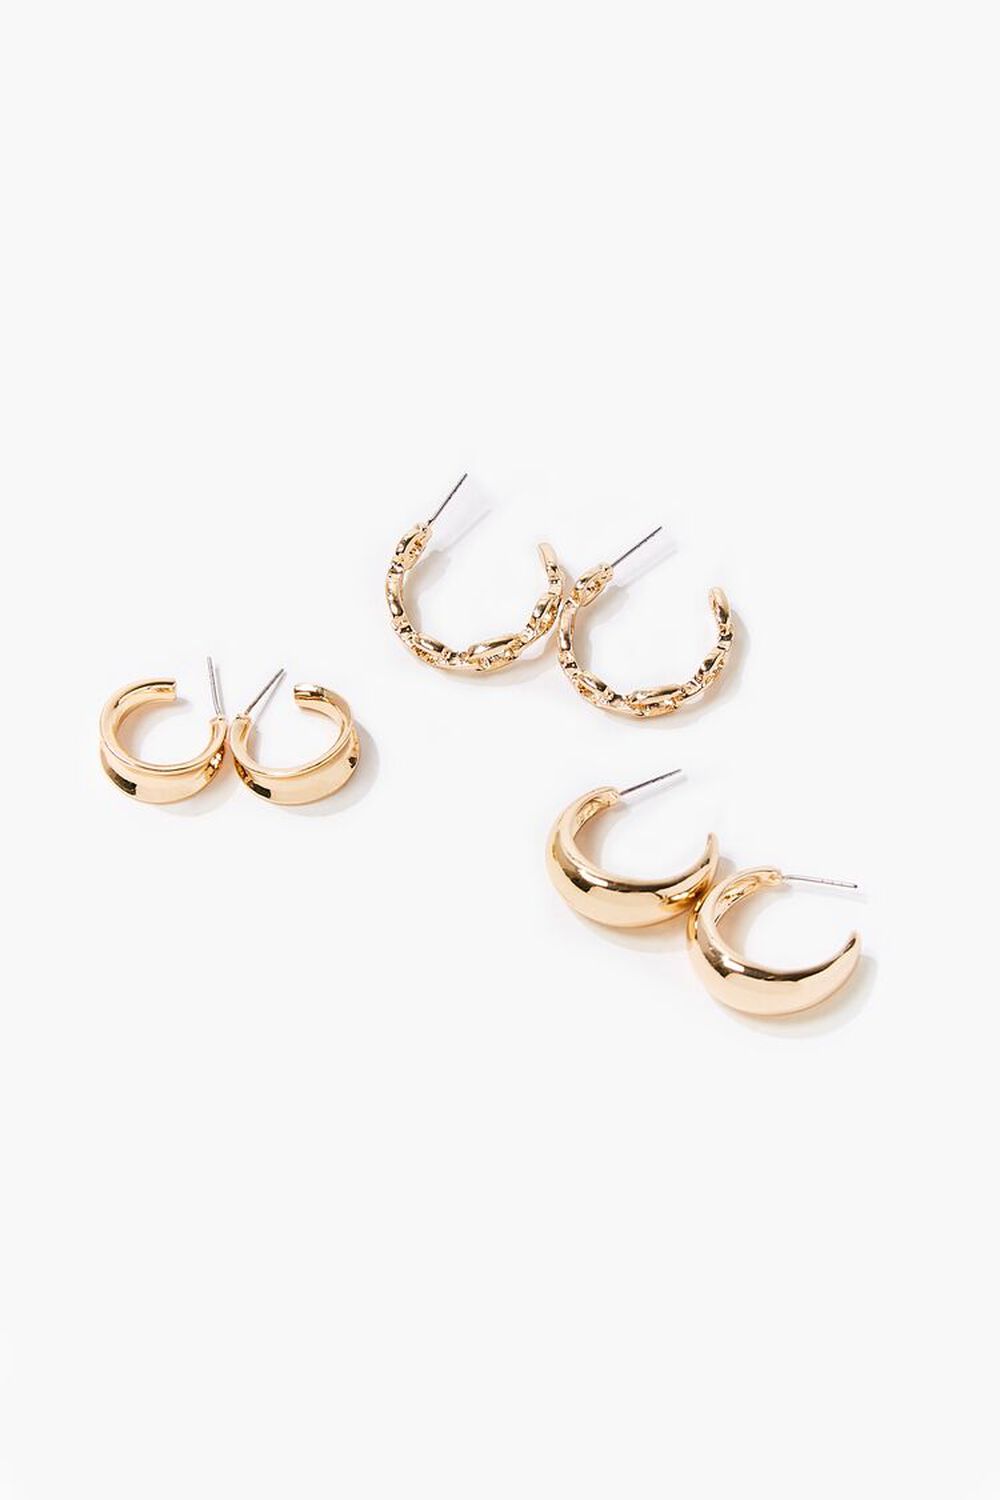 GOLD Upcycled Hoop Earring Set, image 1